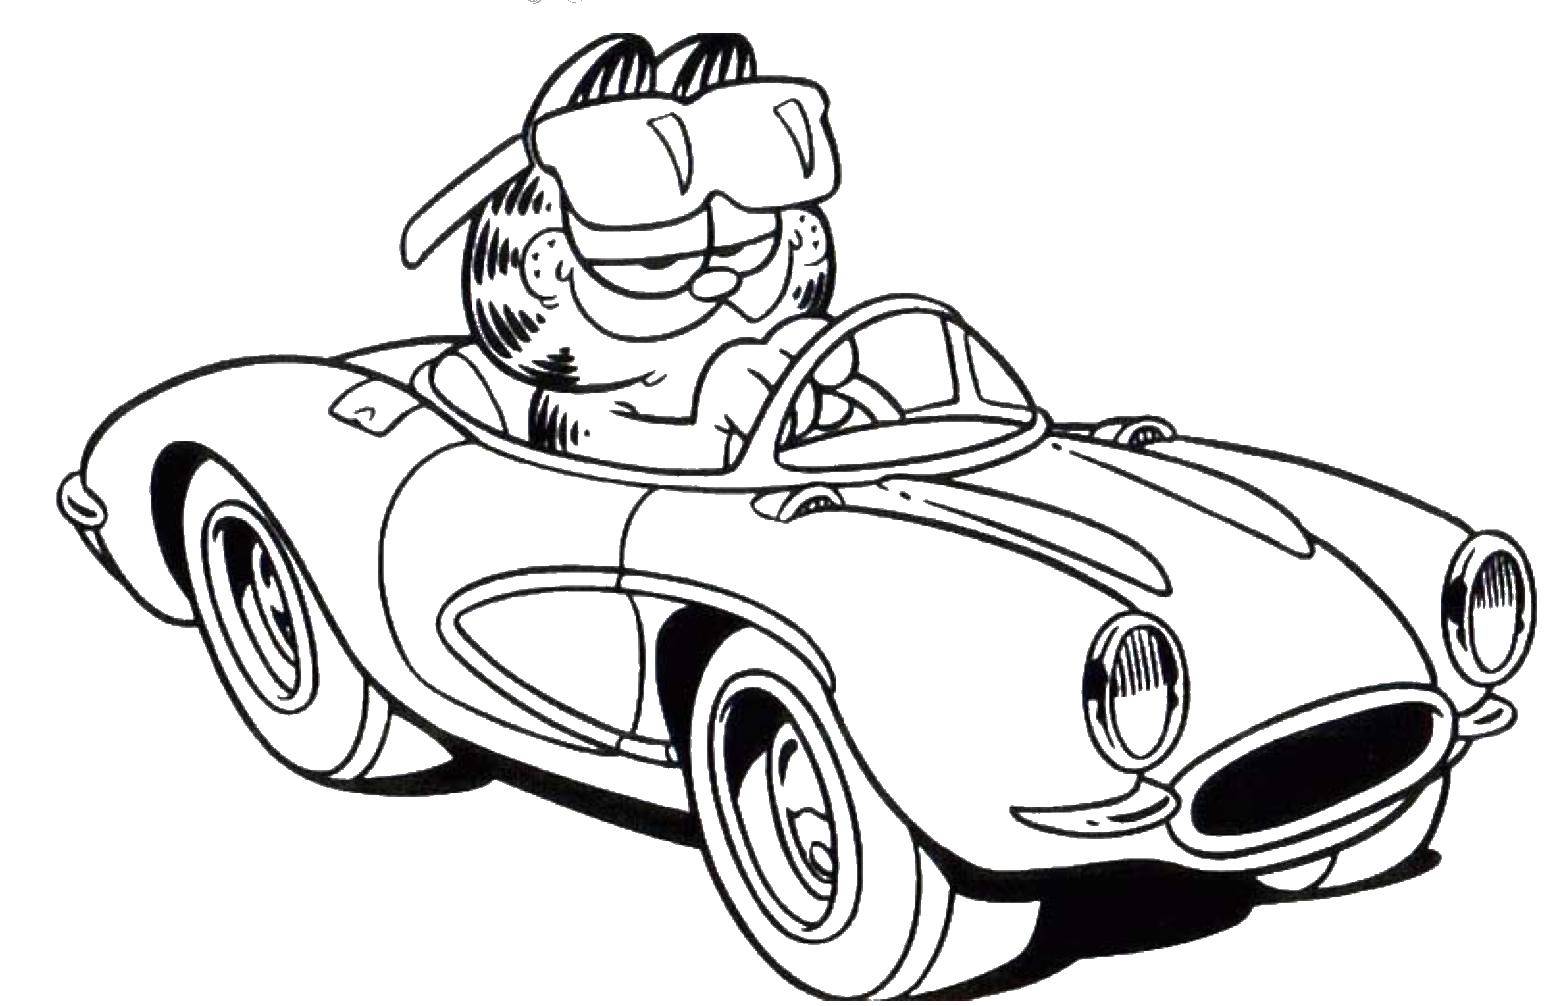 Coloring Garfield drives a car. Category cartoons. Tags:  Garfield , machine.